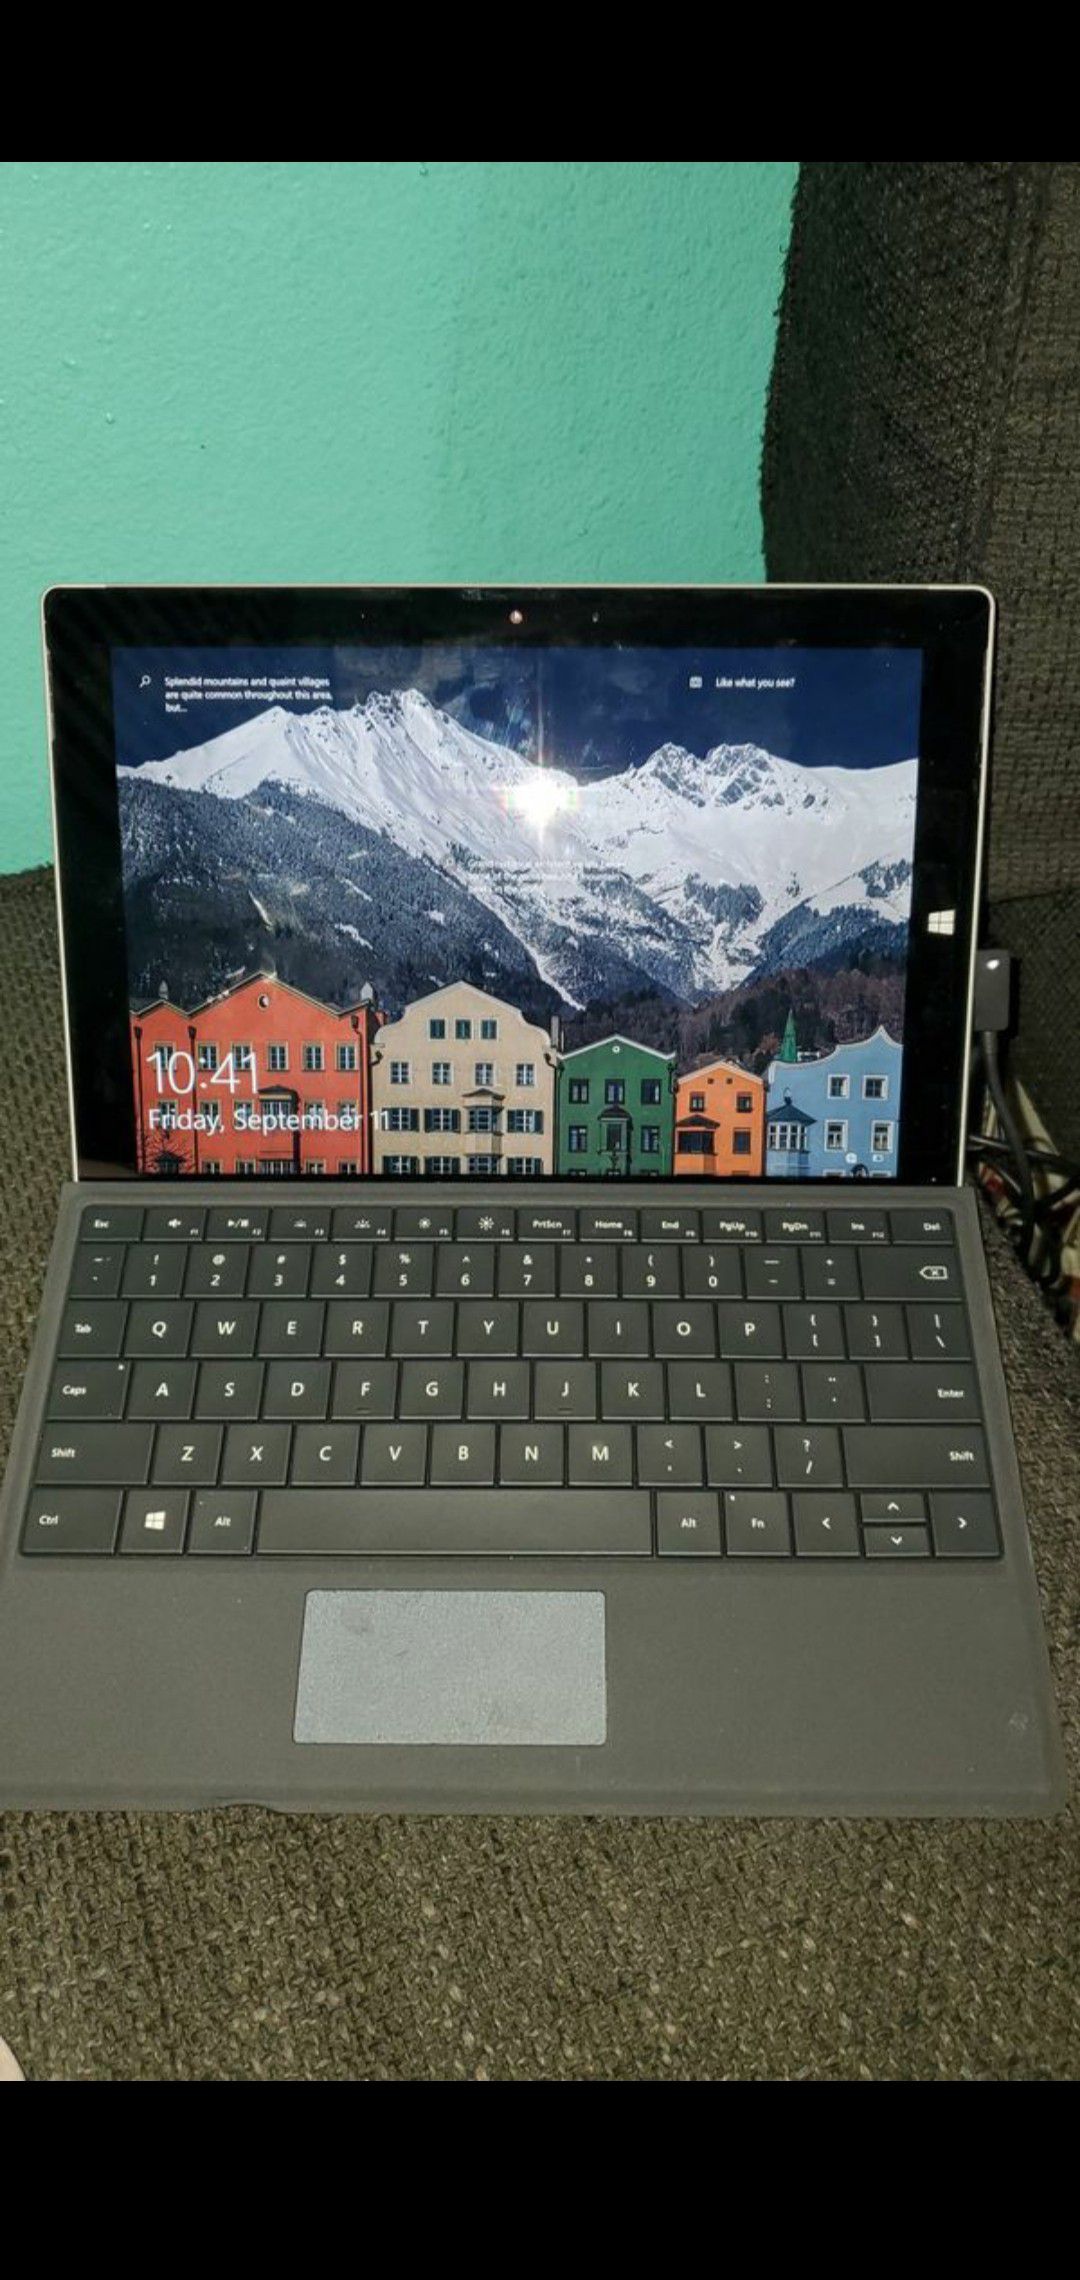 Microsoft Surface 3 Touchscreen Intel Atom Quad-Core Processor 4GB RAM 128GB SSD Window 10 Pro Tablet. Comes with charger and type cover